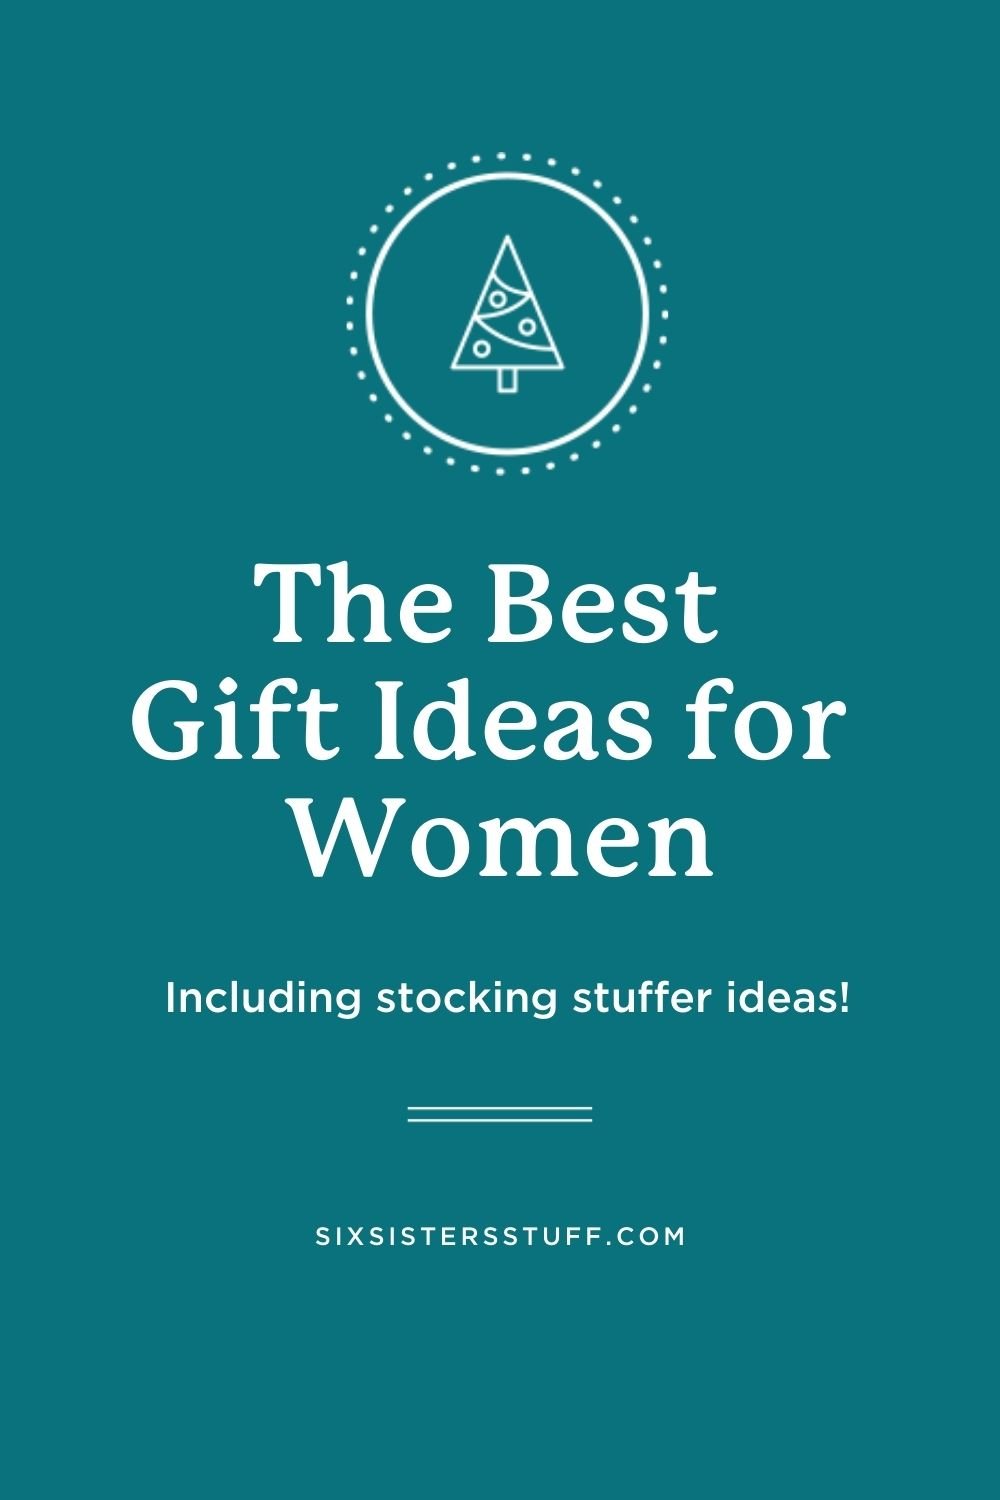 The Best Gifts for Women (and Stocking Stuffer Ideas for Christmas)